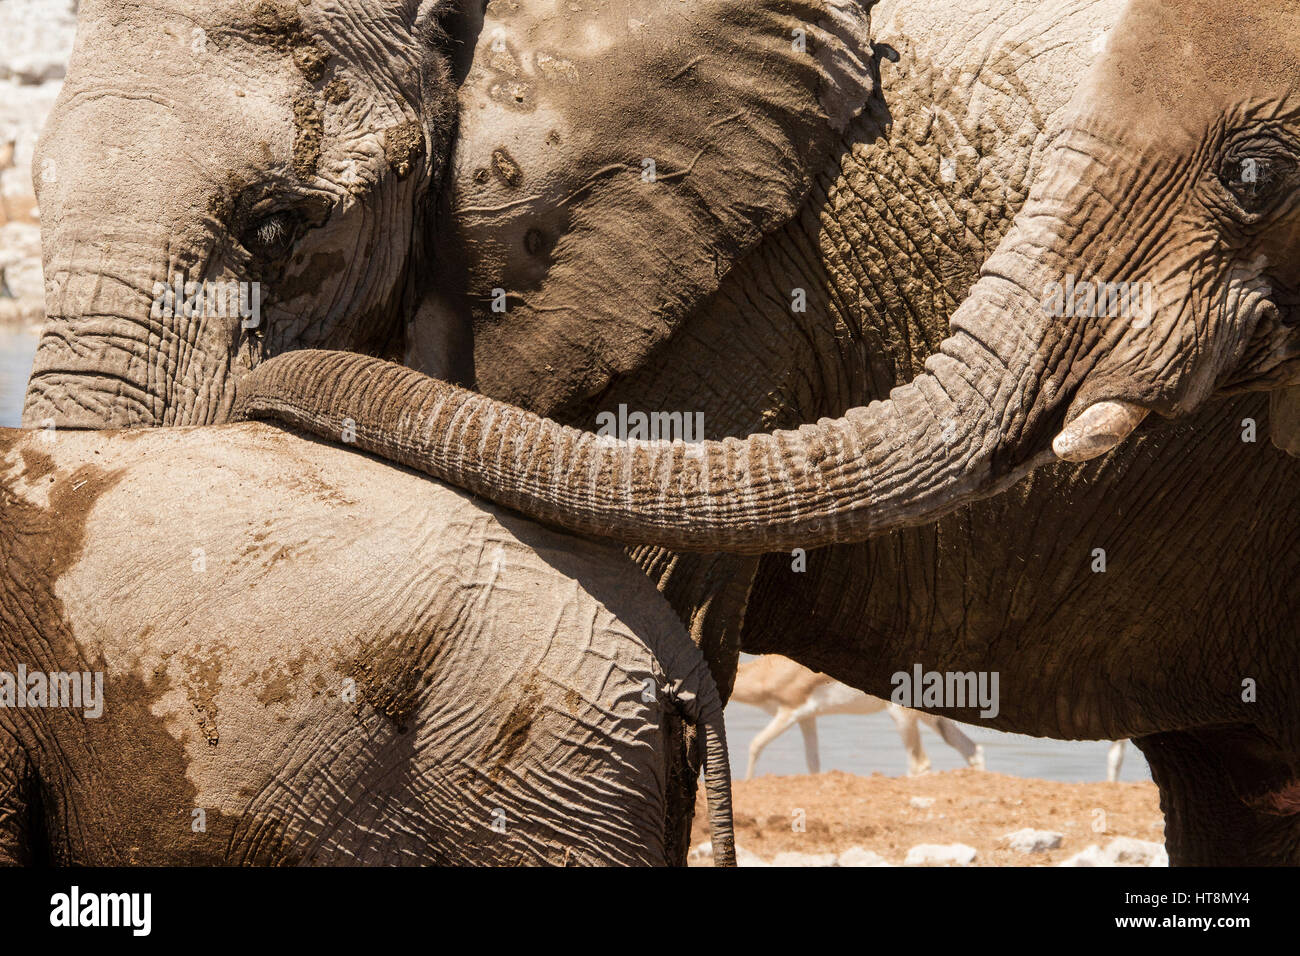 A young African elephant being caressed by its mother. Stock Photo